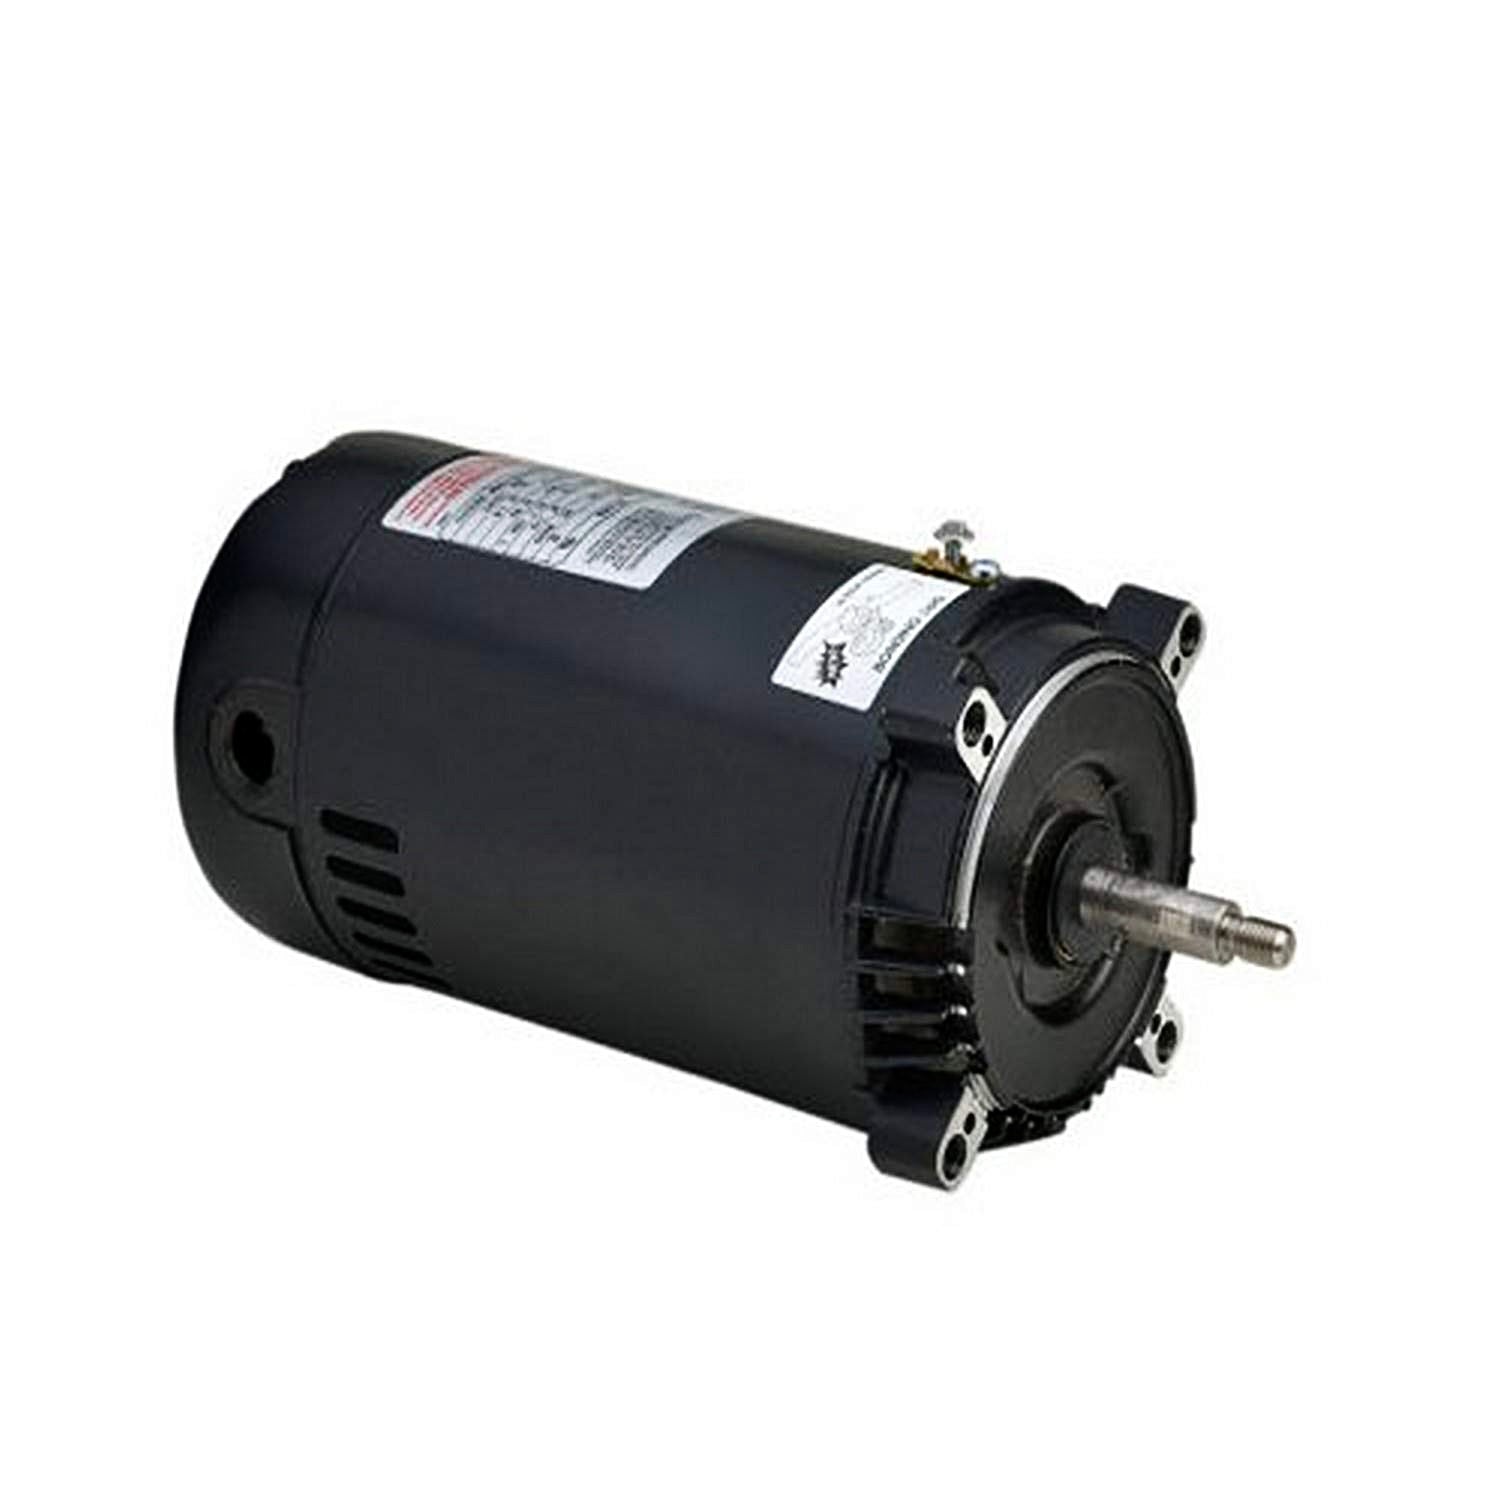 Hayward Maxrate Replacement Motor - Super Pump and Super II (230V)